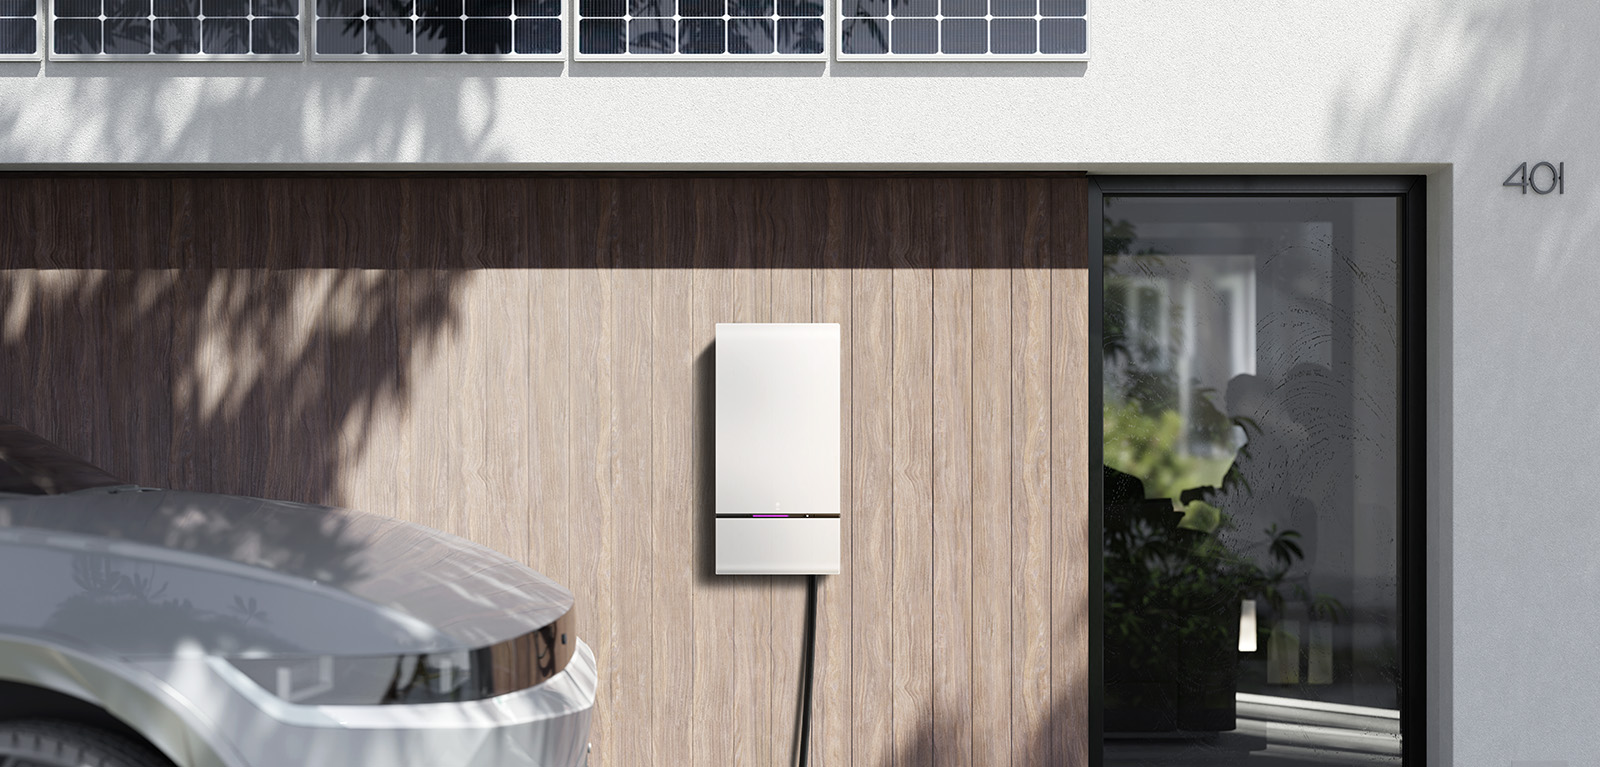 Quasar 2 is a 11.5kW bidirectional charger that allows EV owners to power their homes (V2H) or send energy back to the grid (V2G). Photo: Wallbox